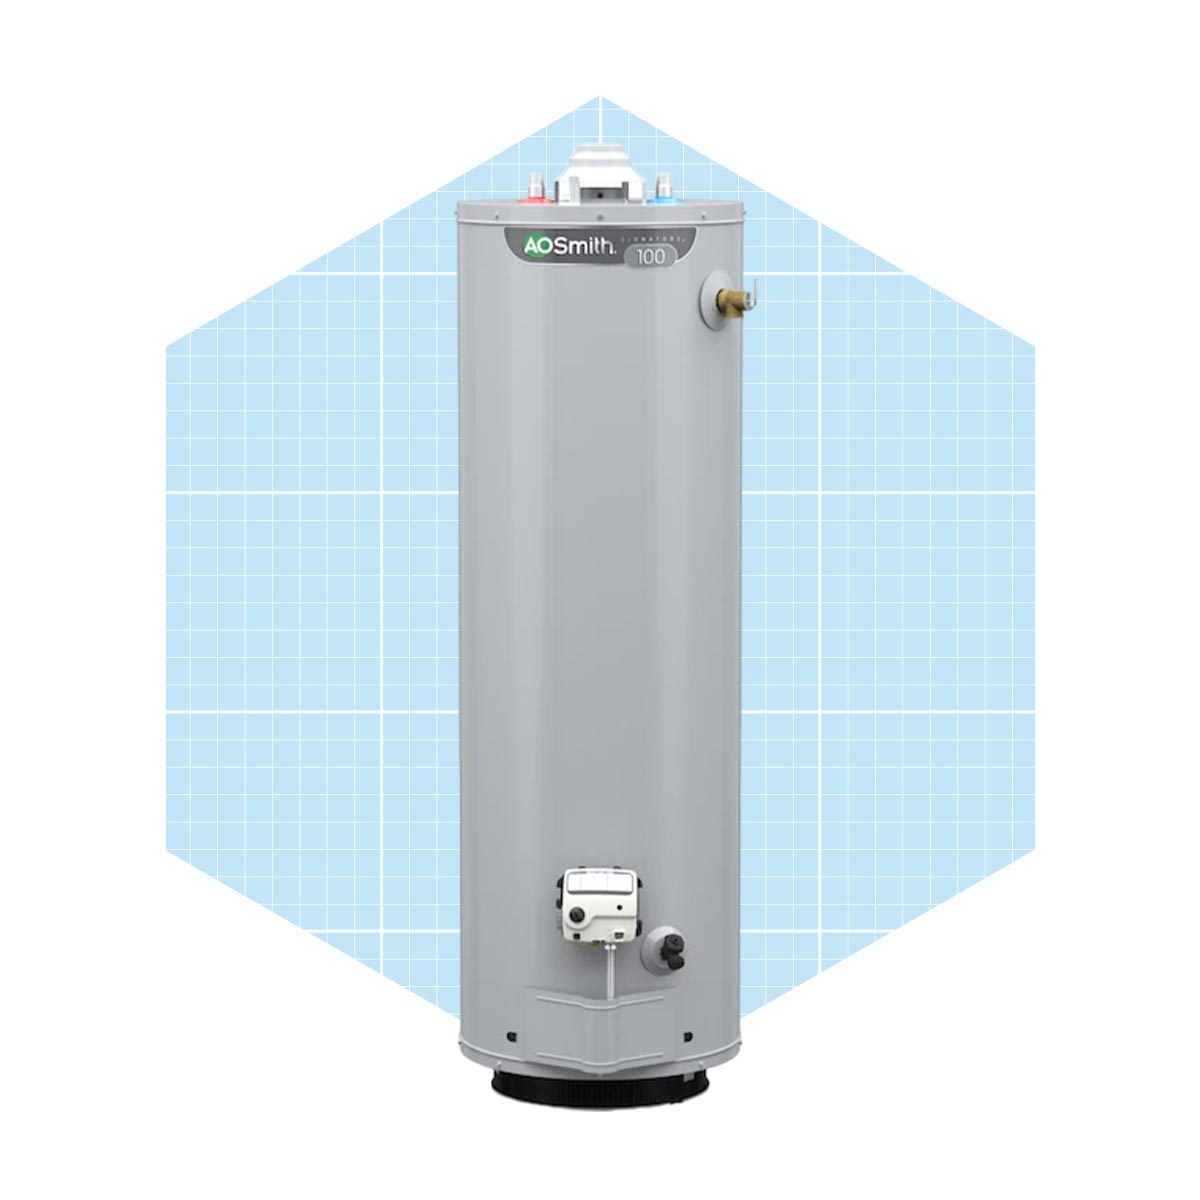 Best Overall Water Heater